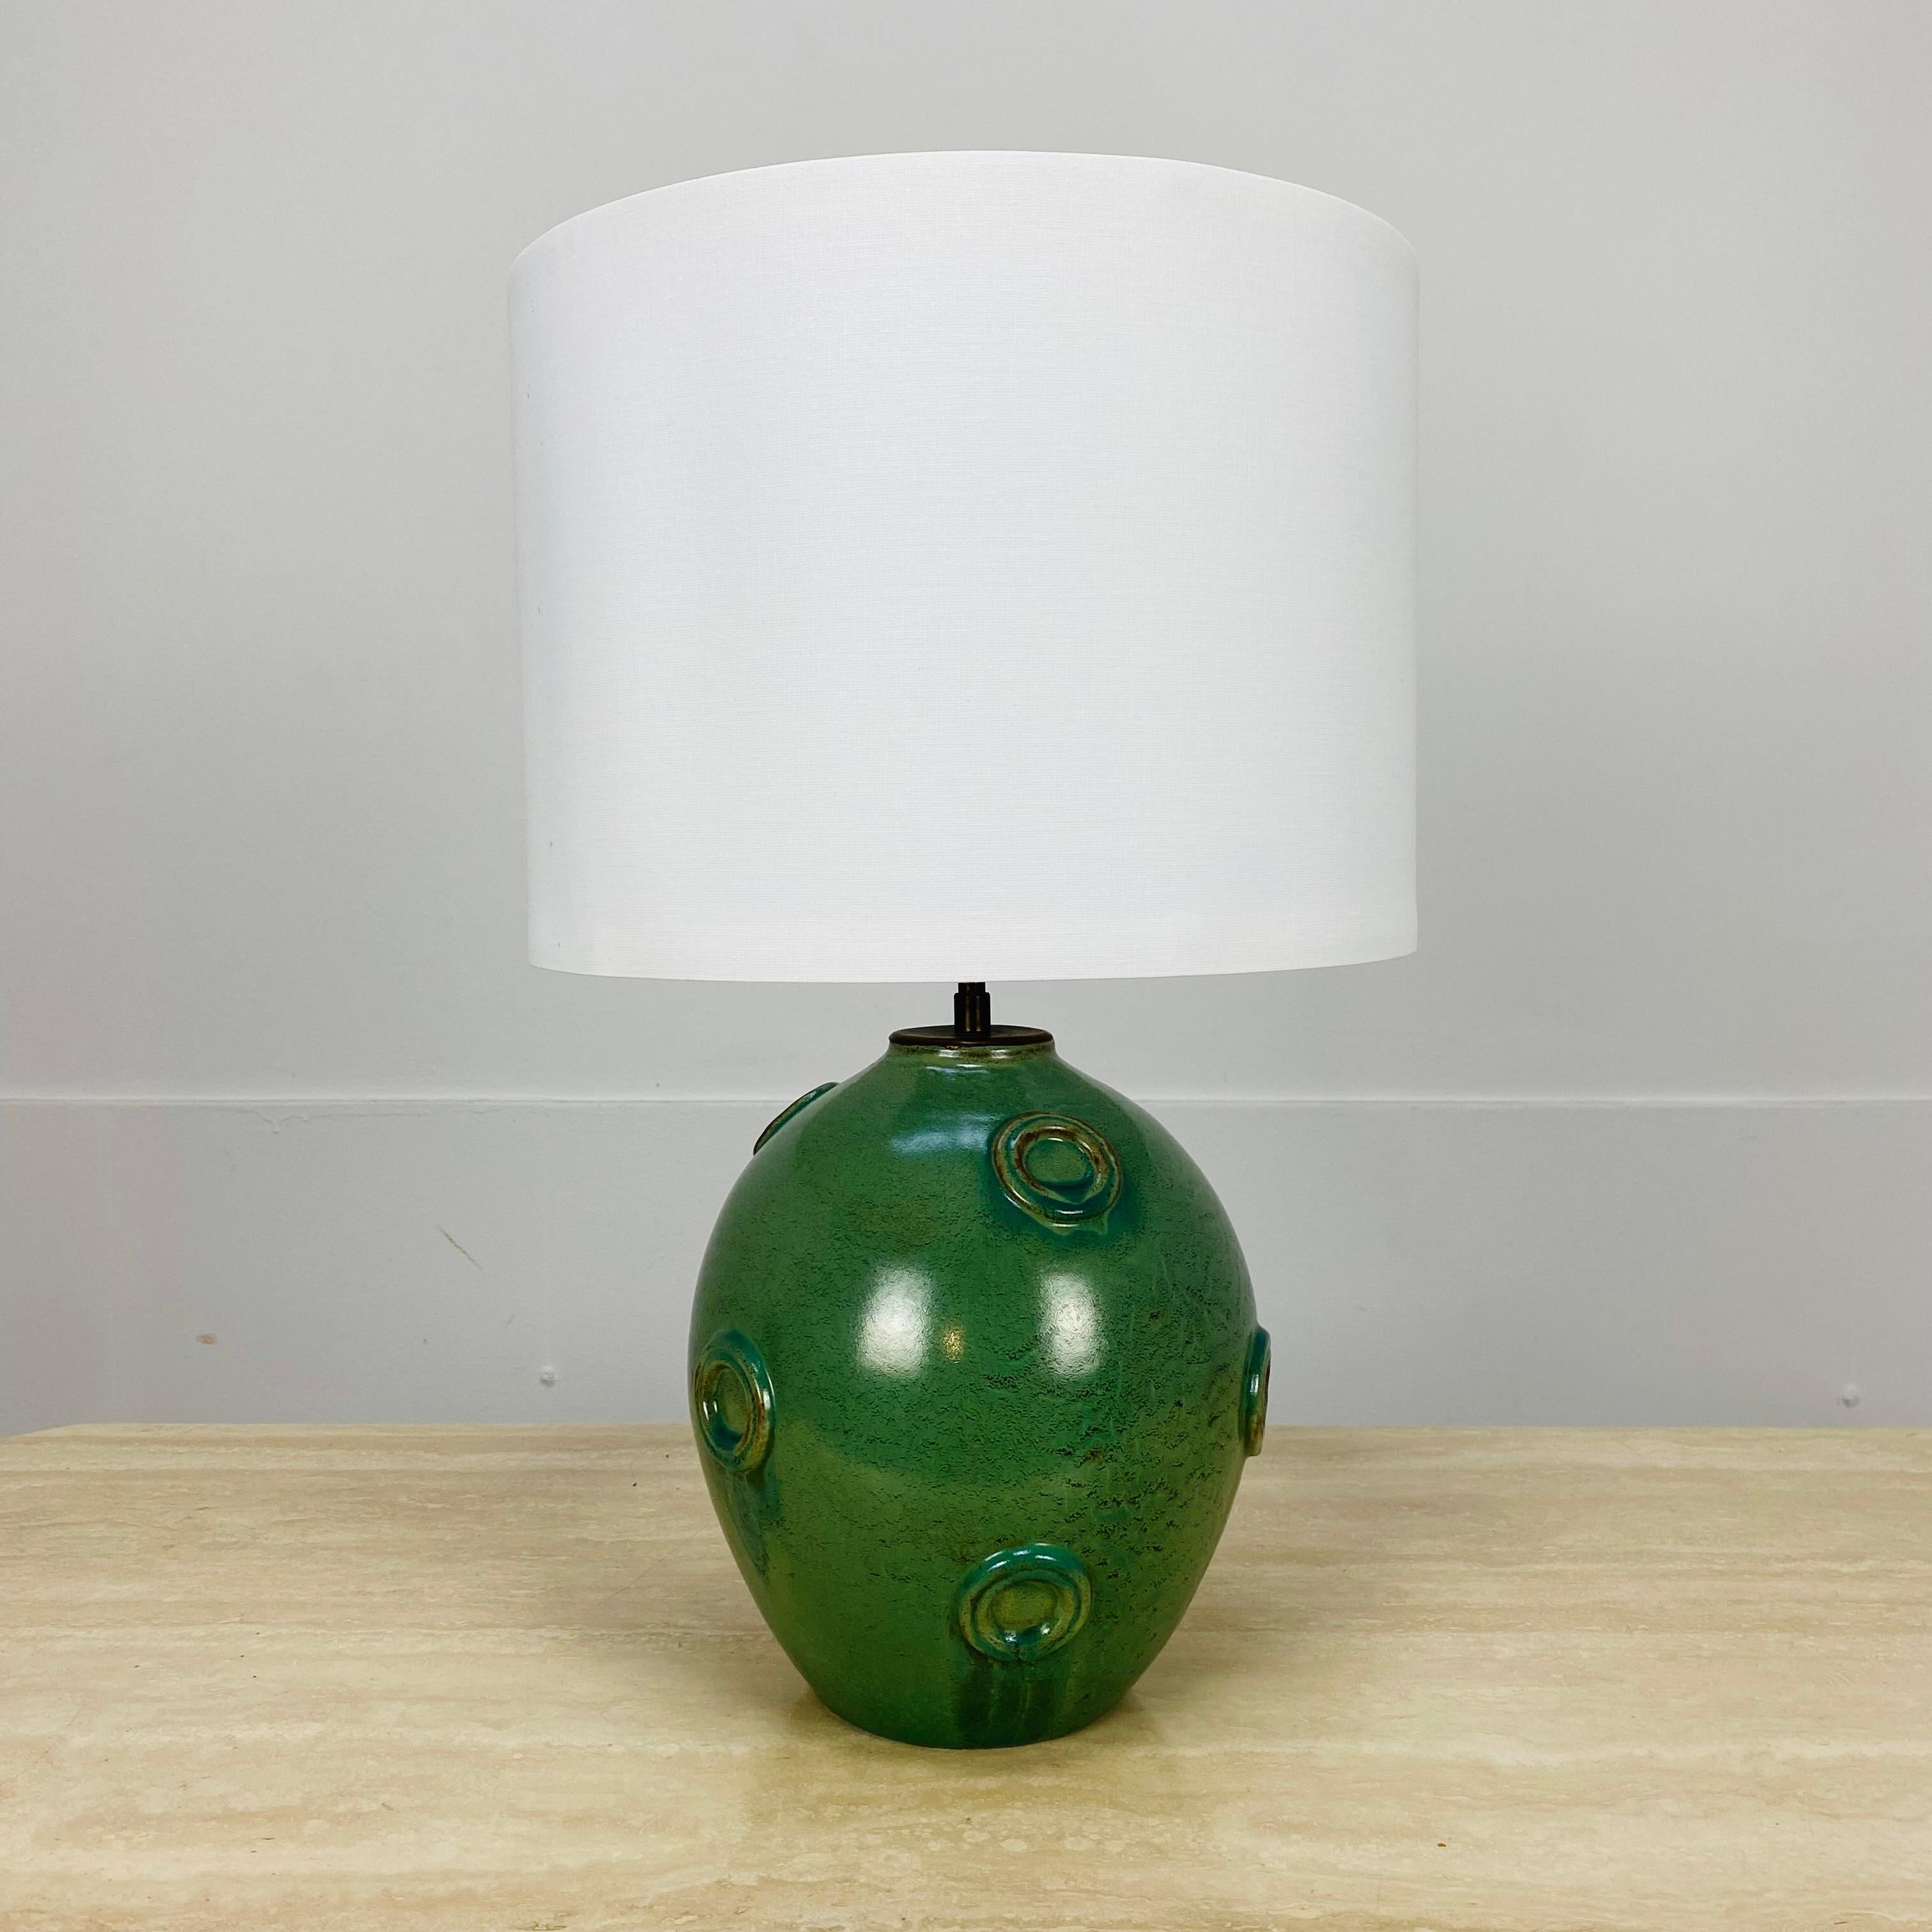 Big table lamp by Jerk Werkmaster for Nittsjo Sweden, 1930, in ceramic. 

Perfect condition. New lampshade, french electrification. 